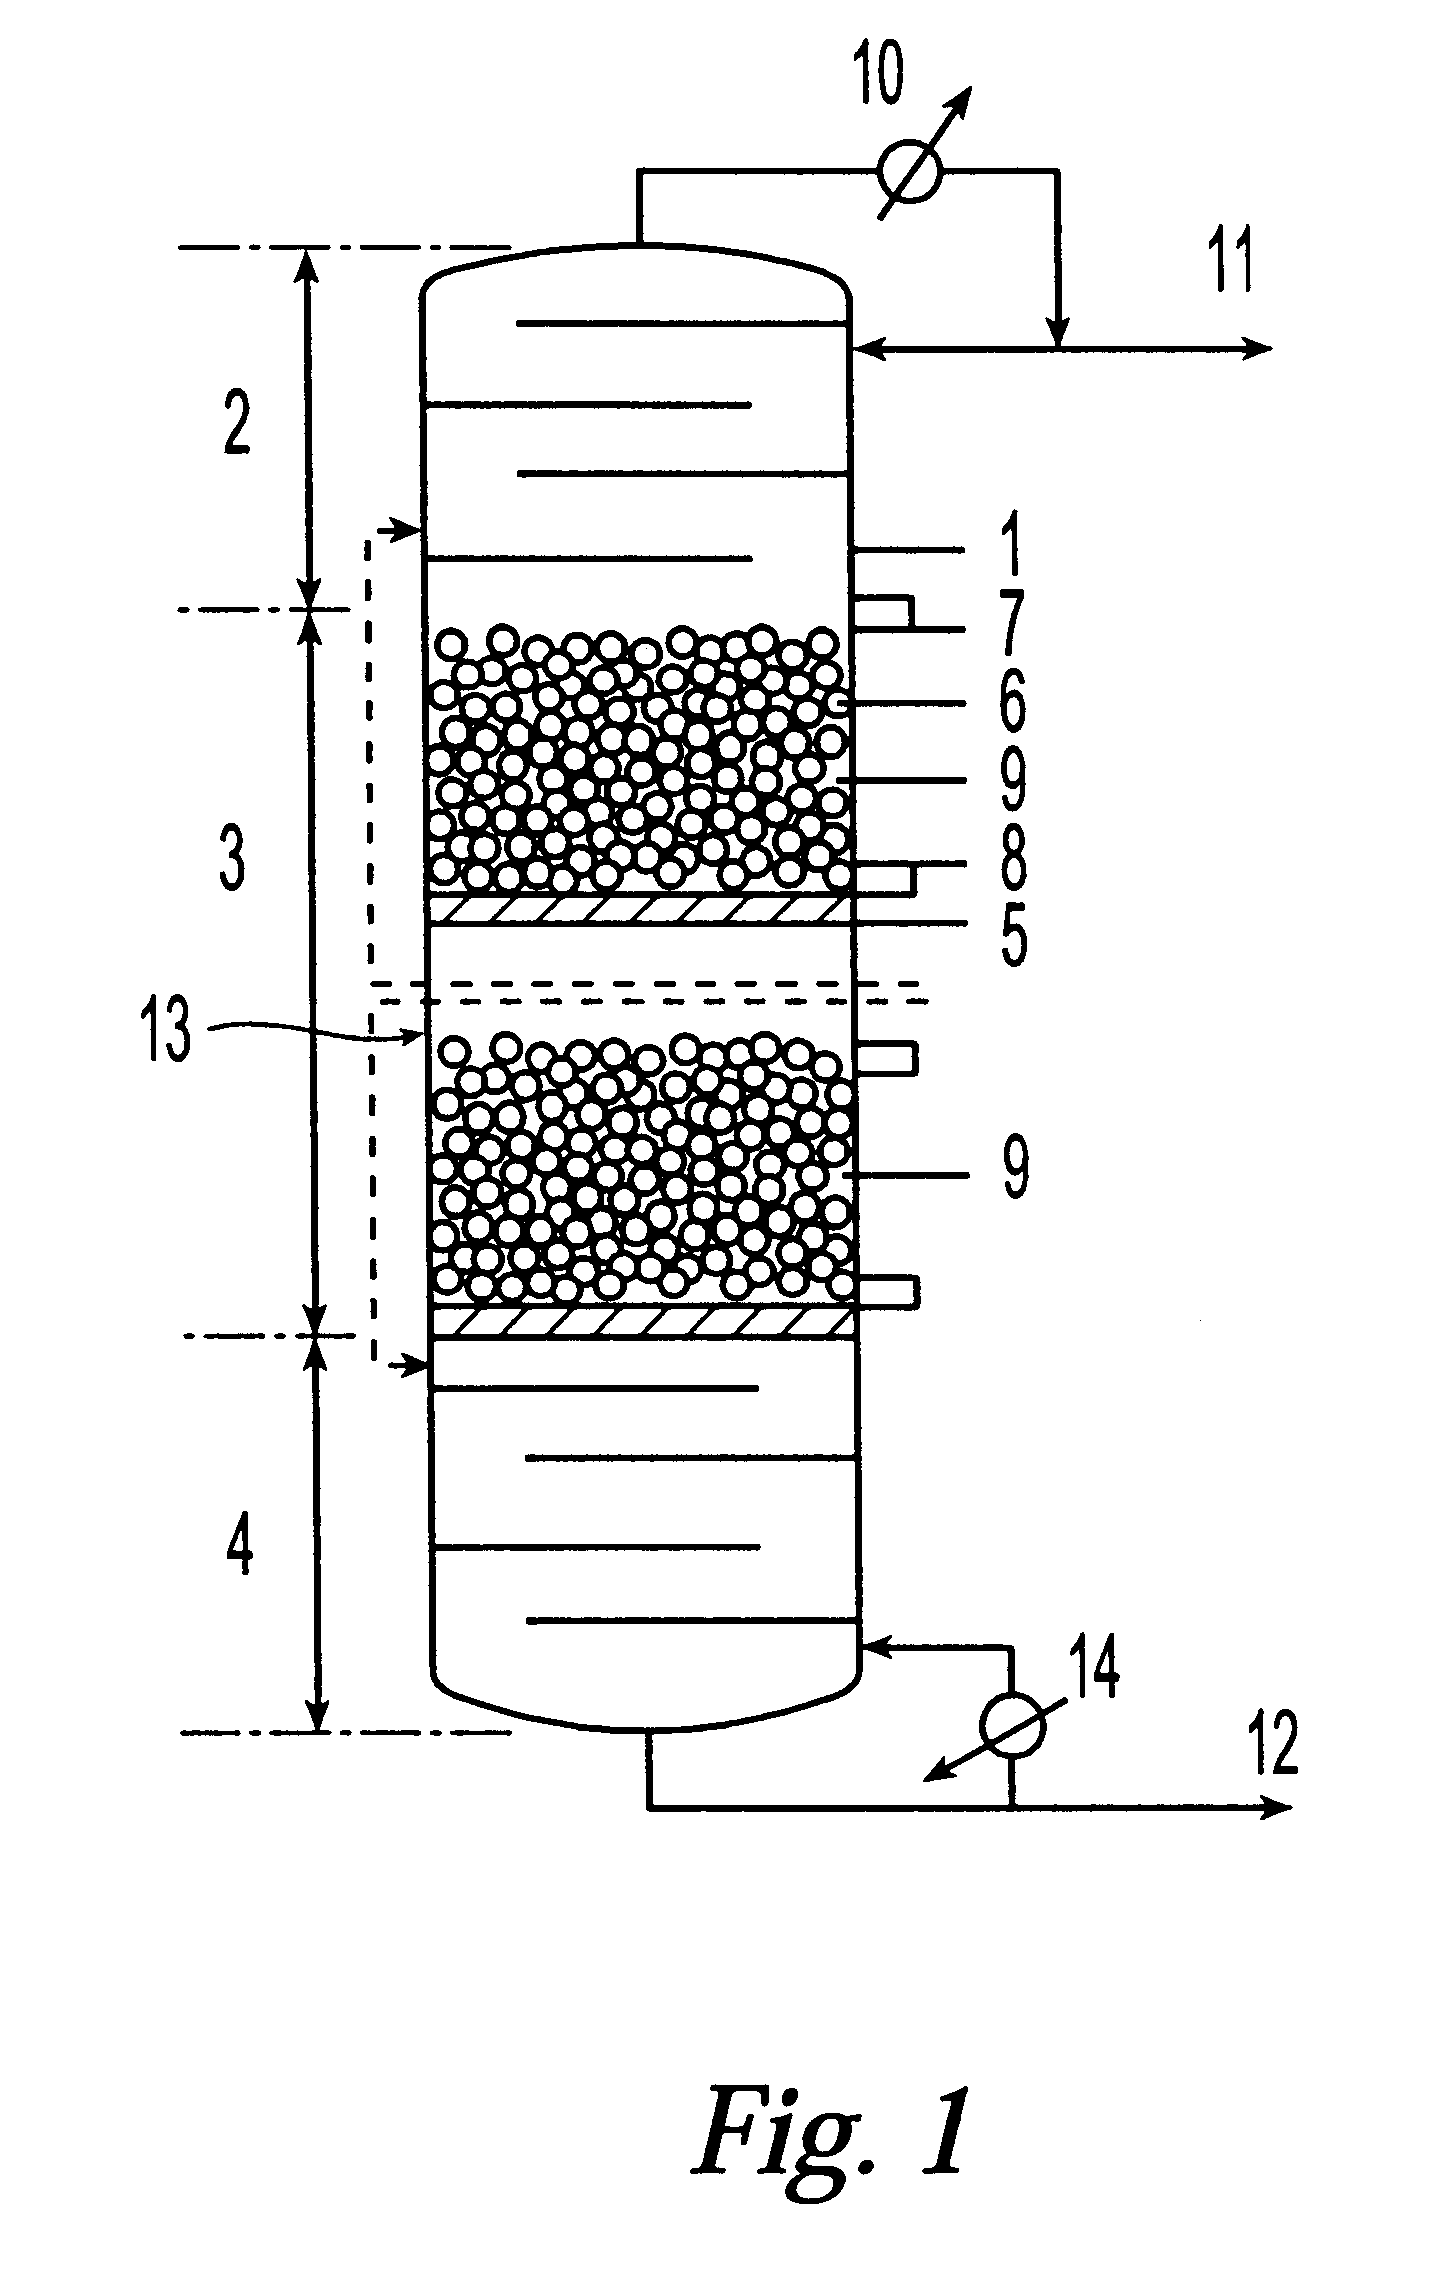 Methods and equipments of using dual functional catalyst of packing type